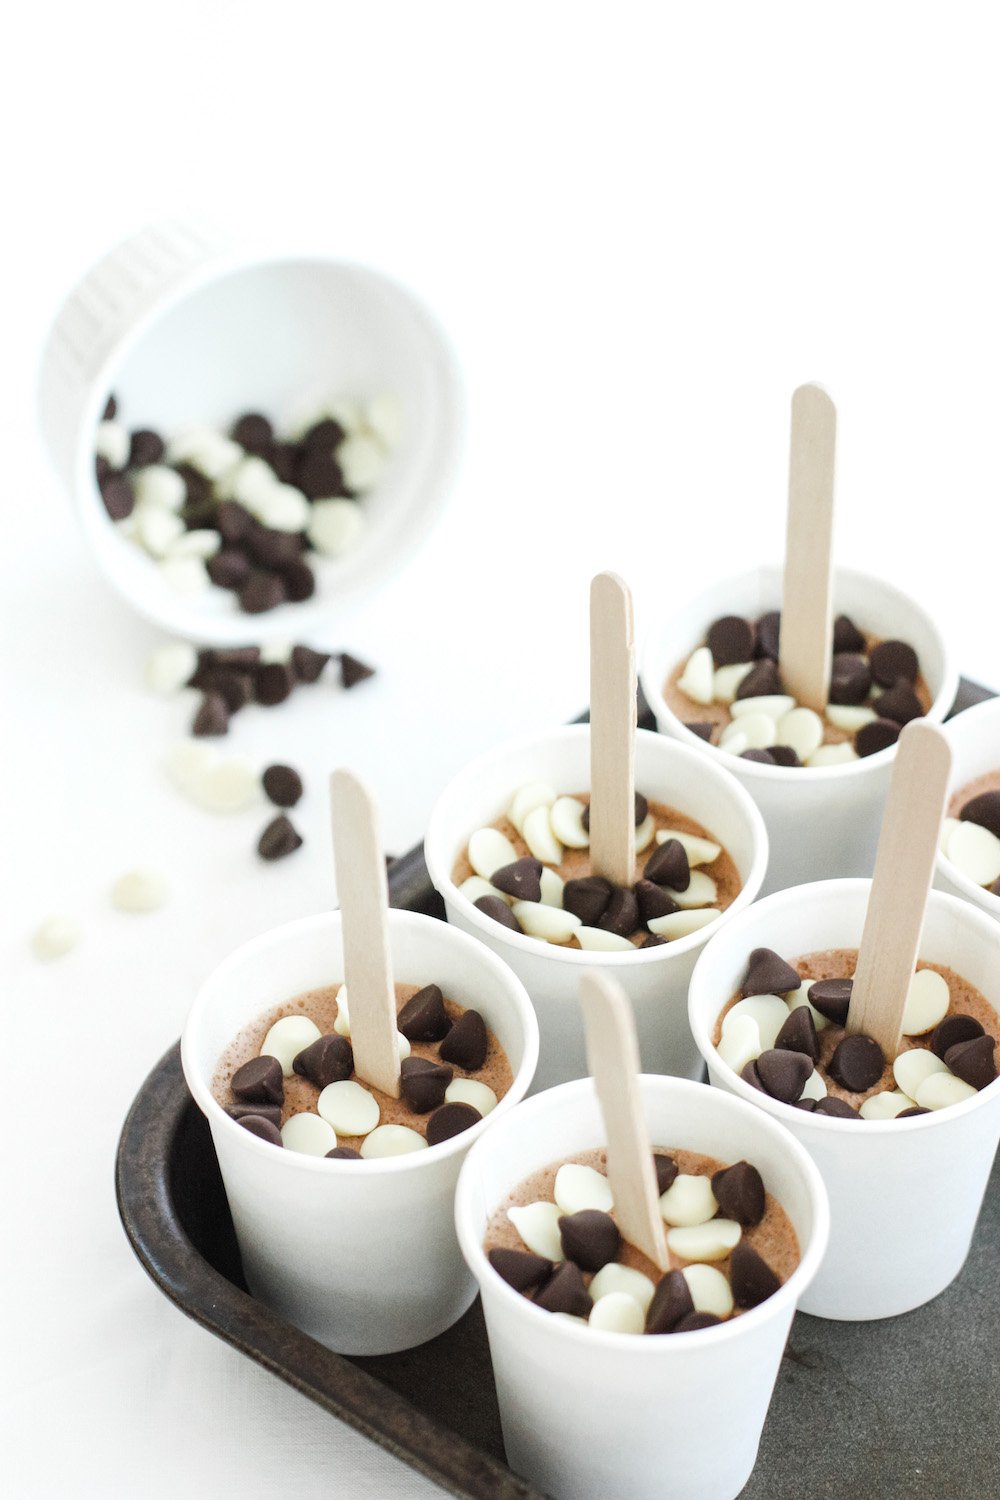 Chocolate Fudge Popsicles in a tray with chocolate chips sprinkled on top